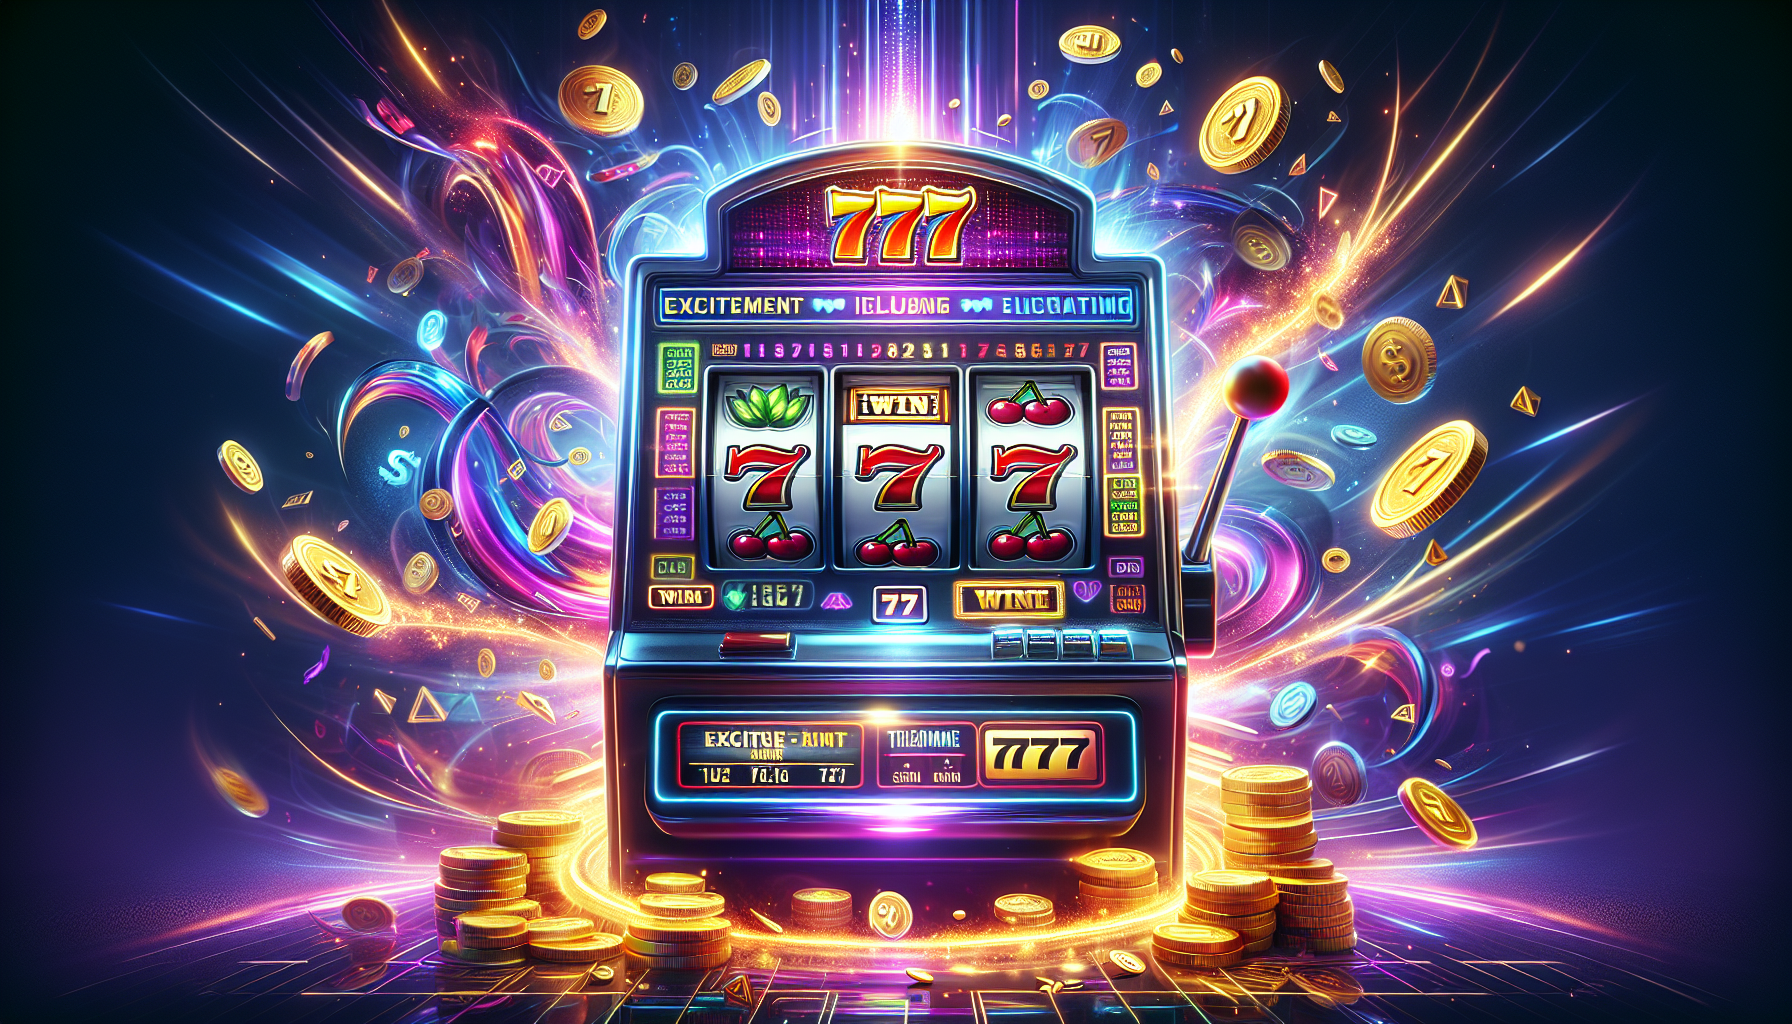 Can You Legally Play Slots Online For Real Money?